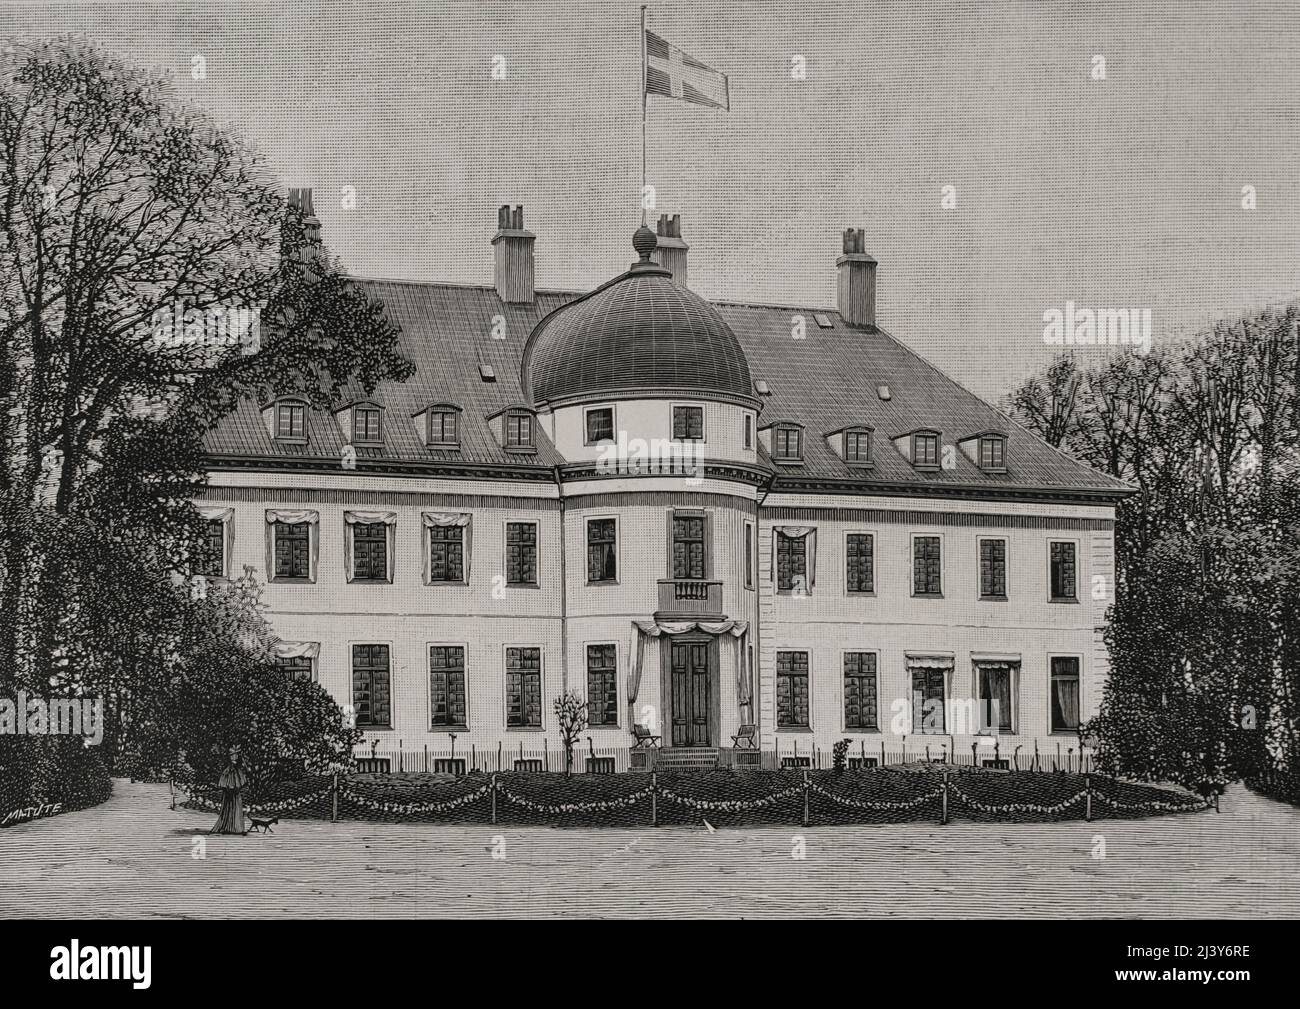 Denmark, Gentofte. Bernstorff Palace, the royal summer residence where Queen Louise (1817-1898) died. Neoclassical building completed in 1765. Engraving by Matute. La Ilustración Española y Americana, 1898. Stock Photo